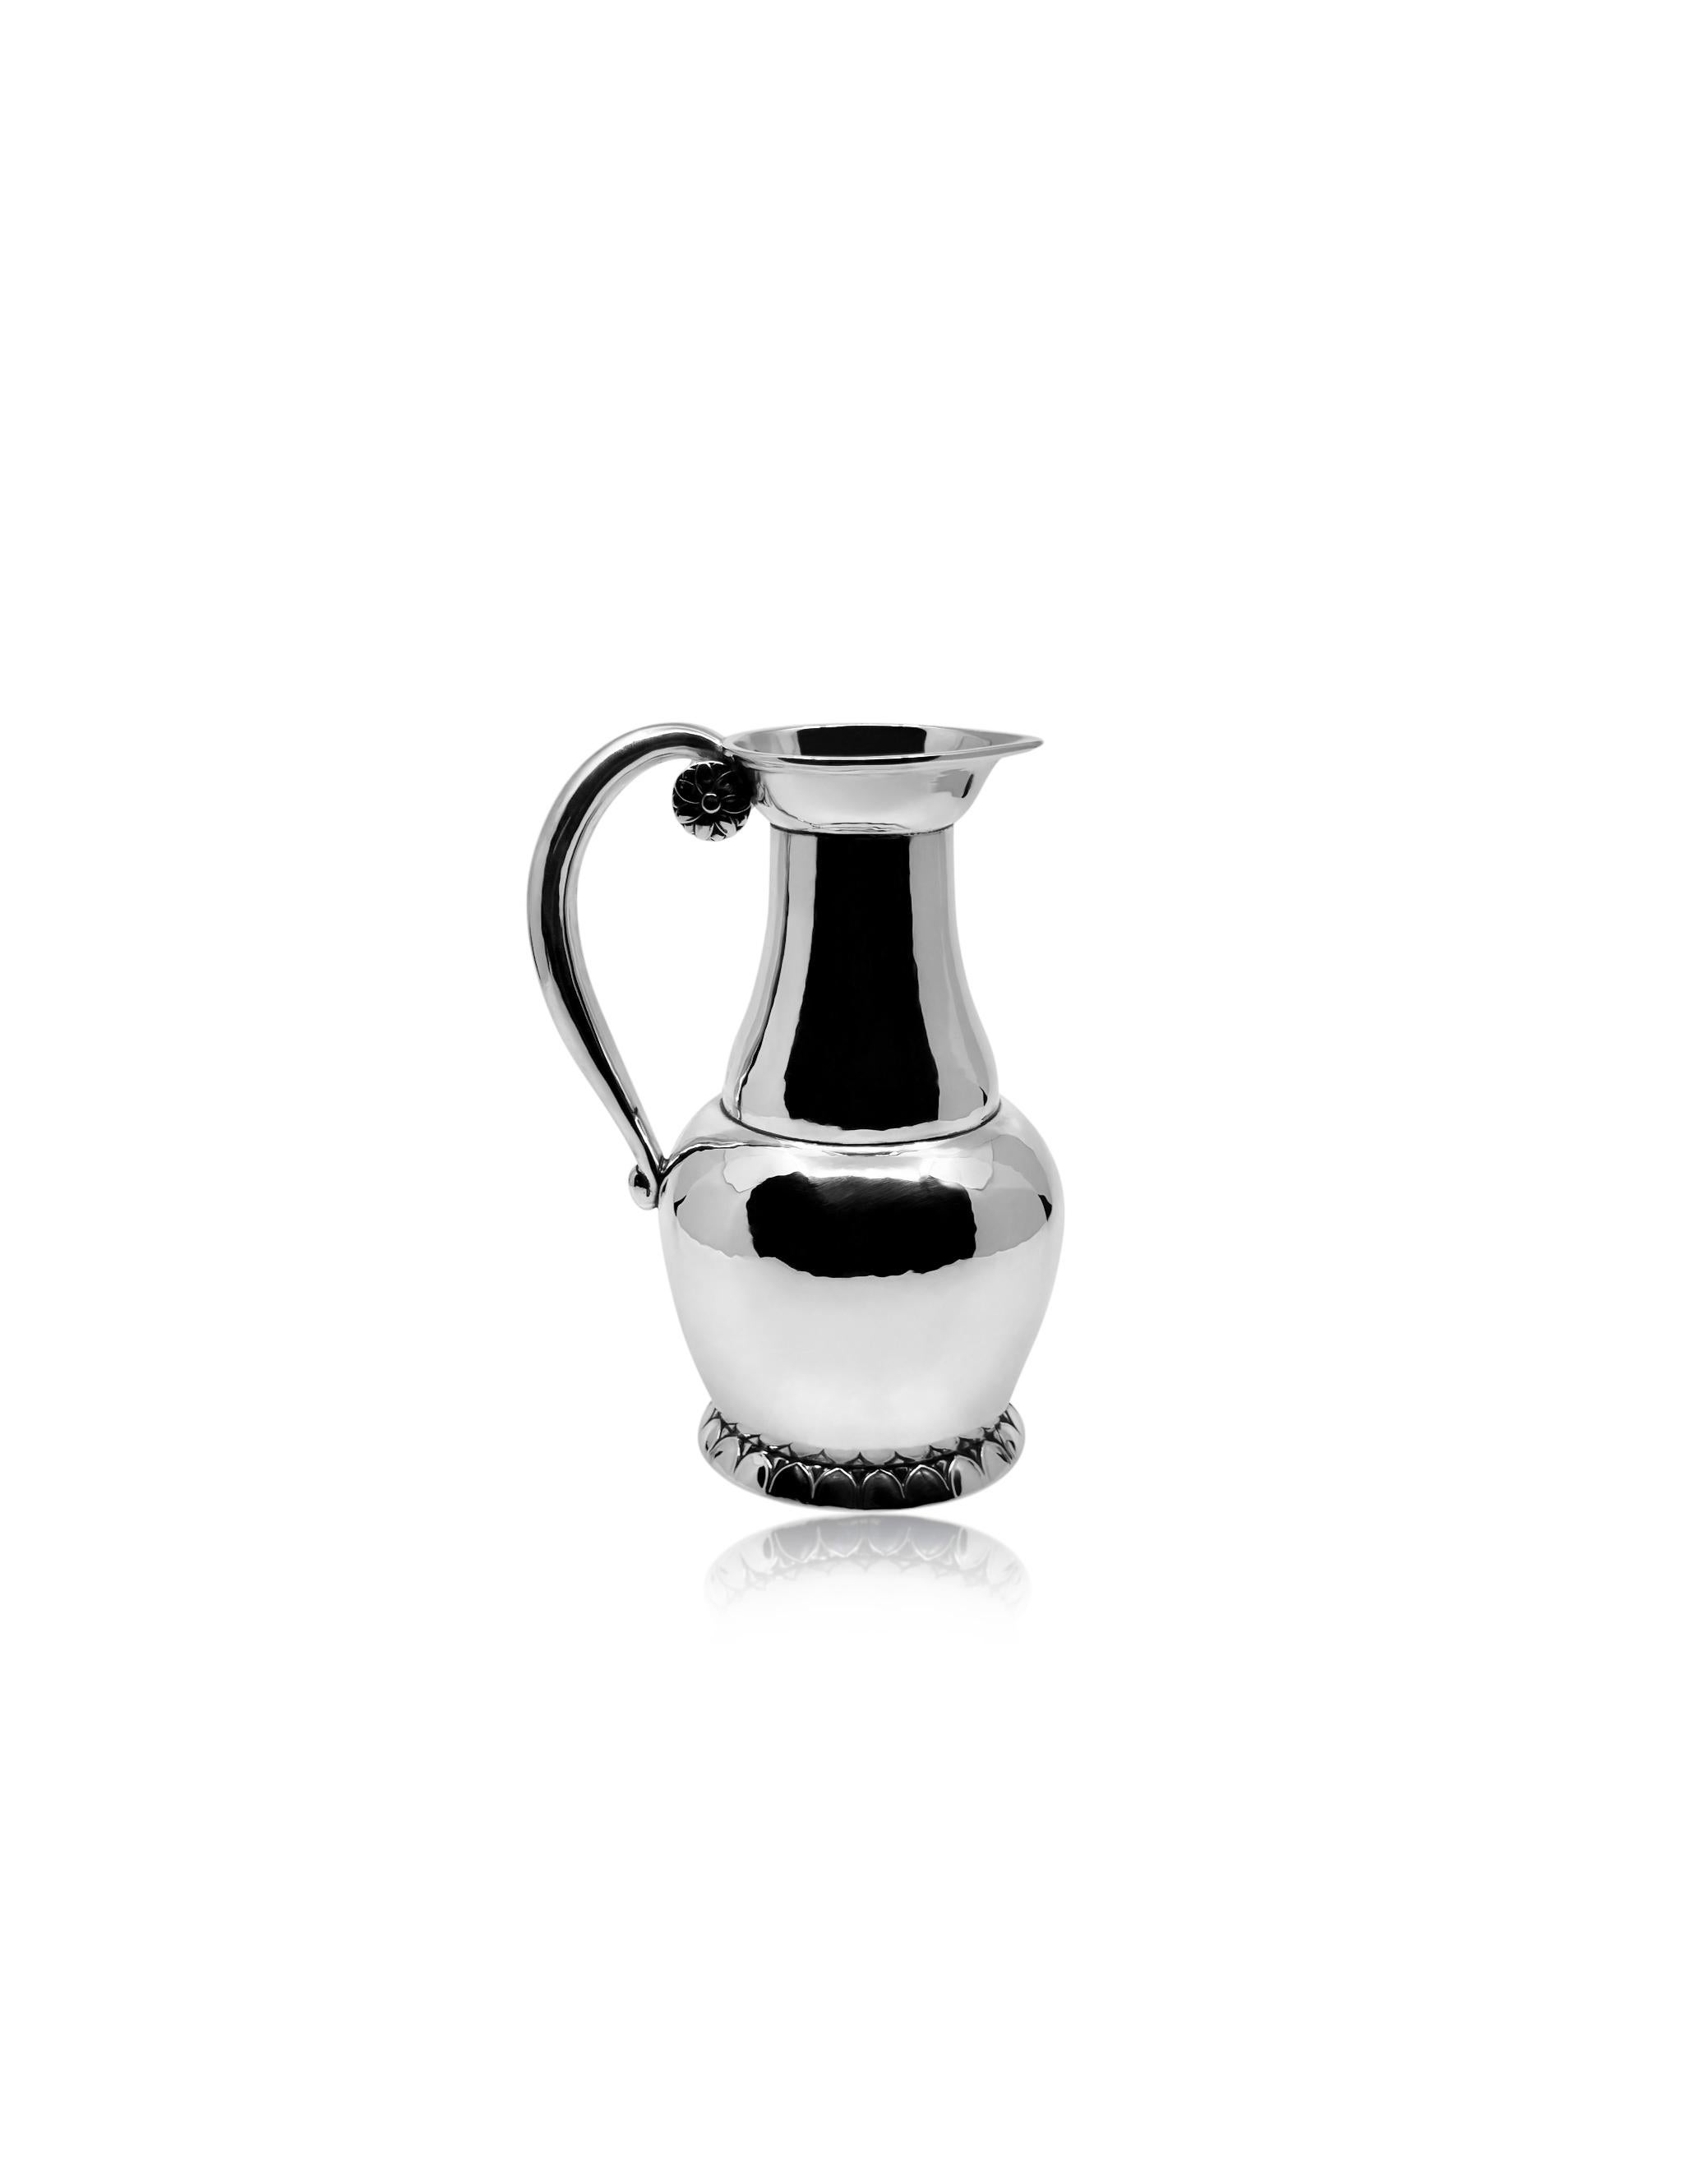 A highly uncommon Georg Jensen sterling silver pitcher, featuring design #8b by Georg Jensen dating back to around 1912. This petite jug showcases an exceptionally rare design, likely intended as a wine jug but versatile enough to serve as a water